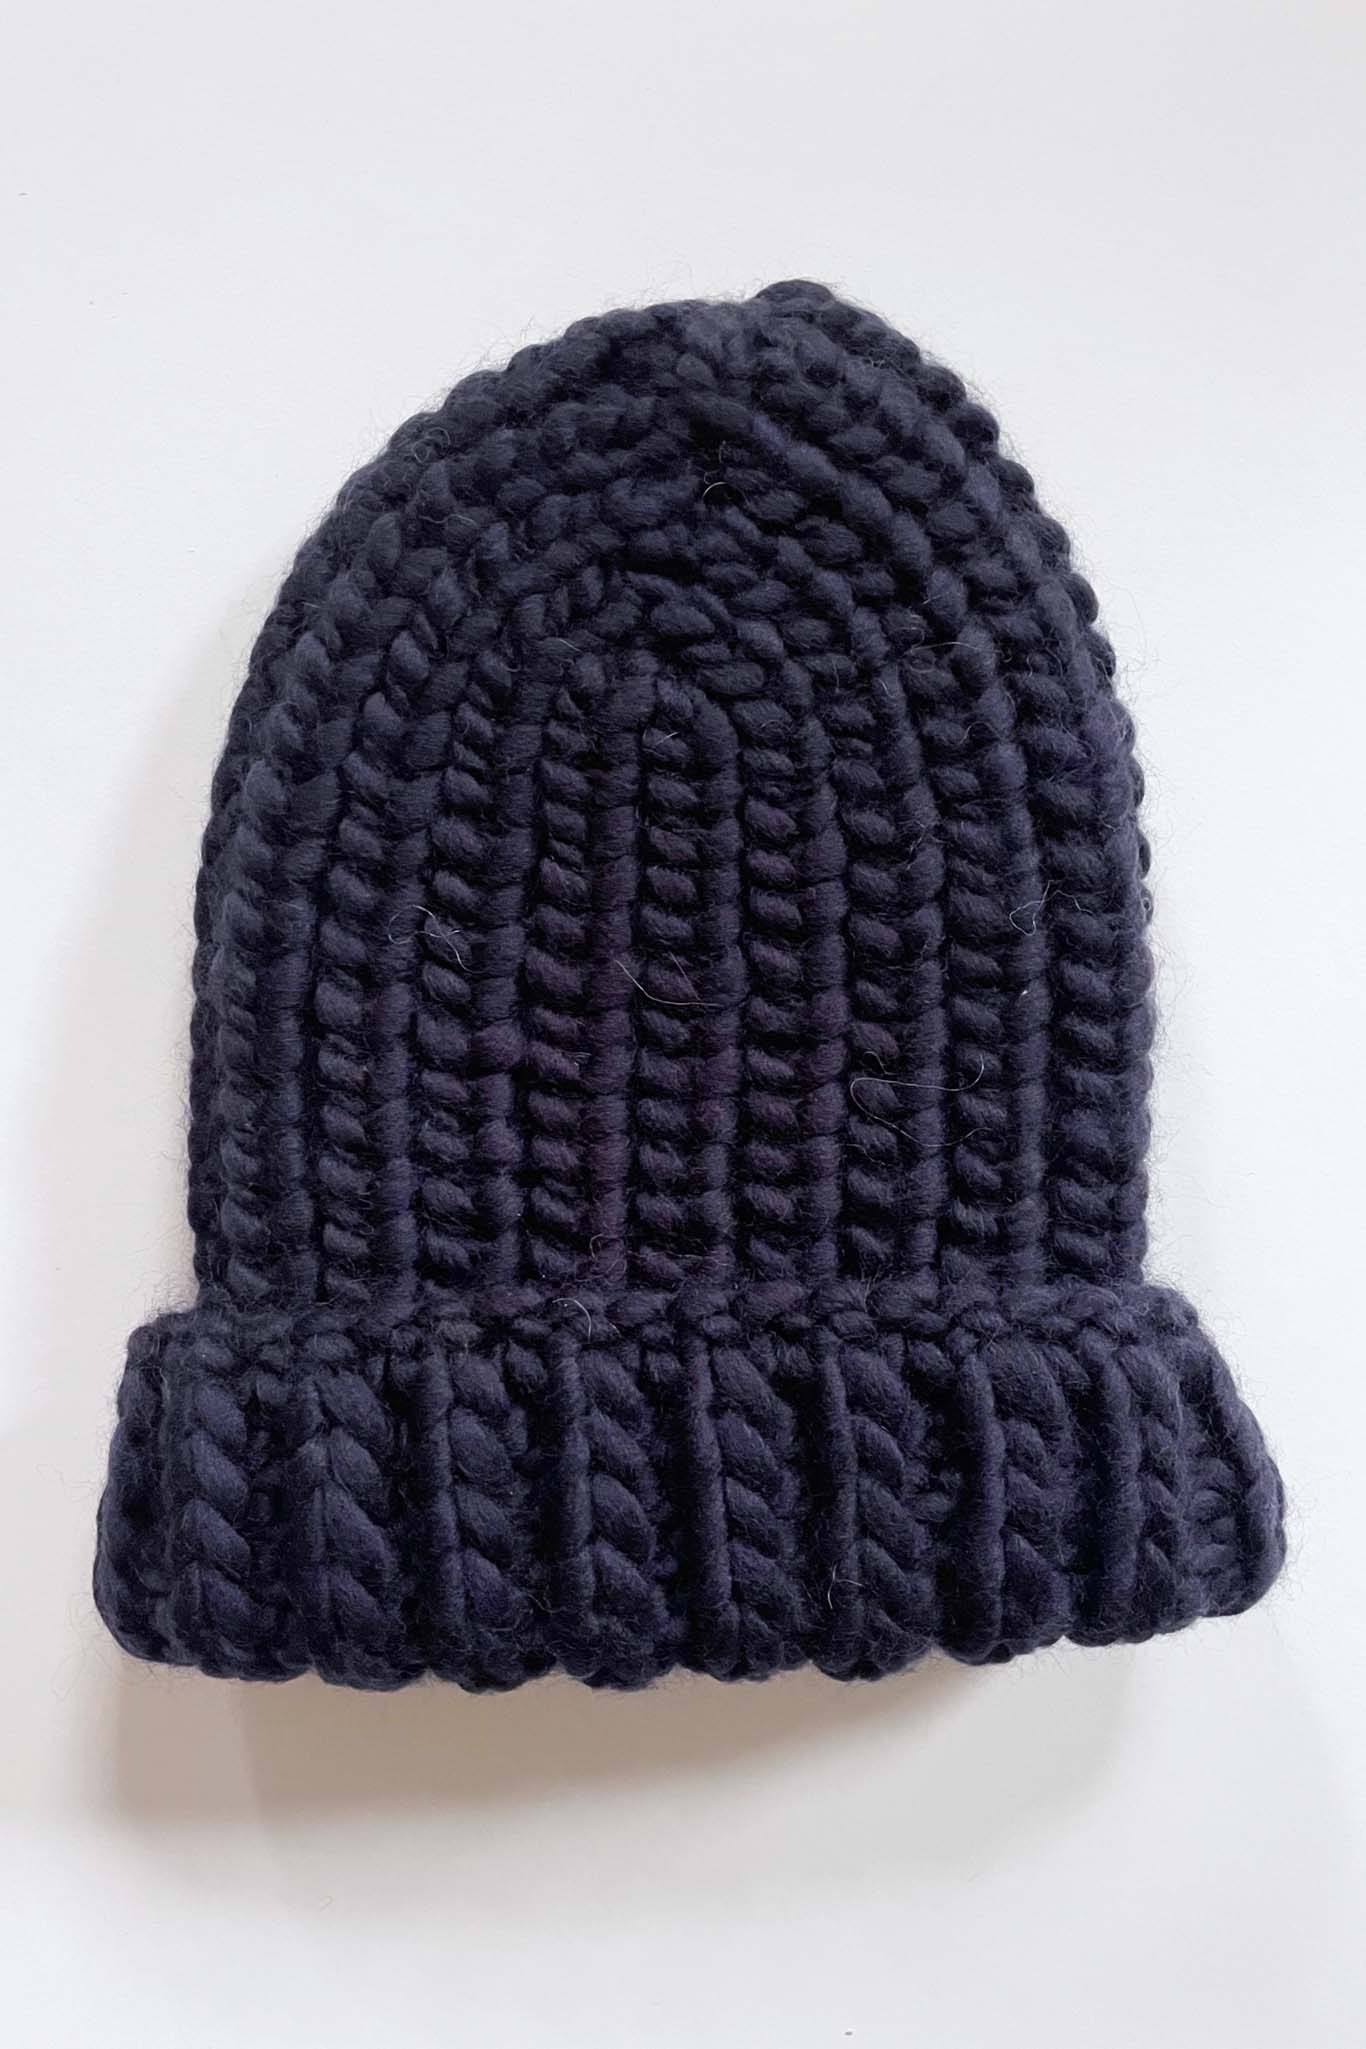 Hand knit wool hat perfect for fall and winter. Made in Perul